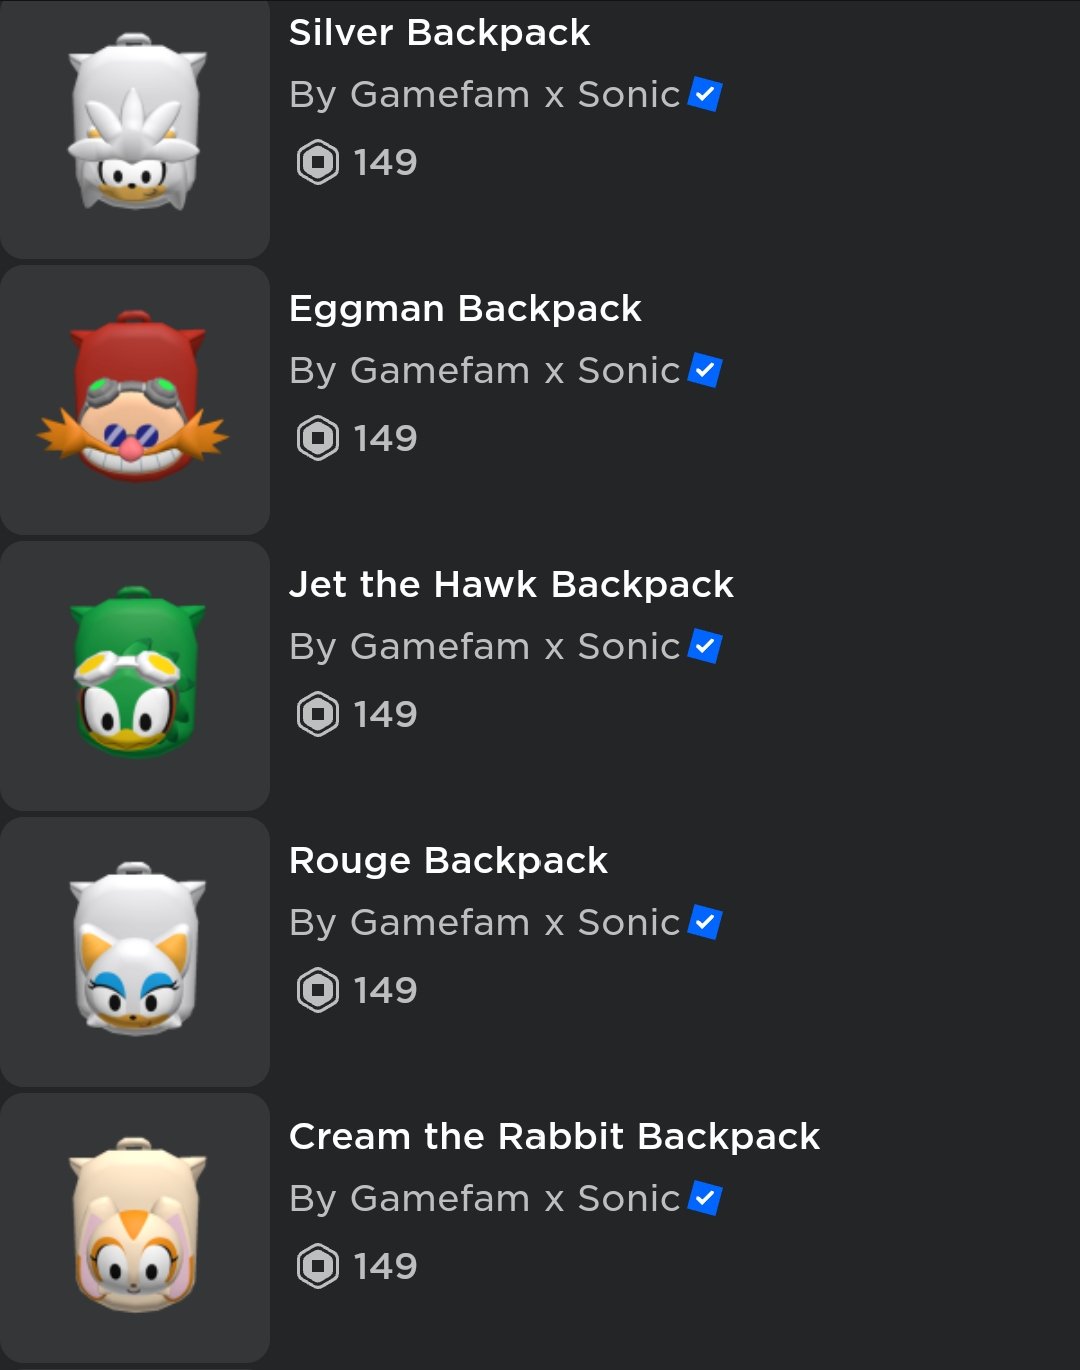 Sonic Speed Simulator  News & Leaks (RETIRED) on X: L RANKING EVERY ROUGE  SKINS SHOULD BE AT THE VERY TOP @rublied / X